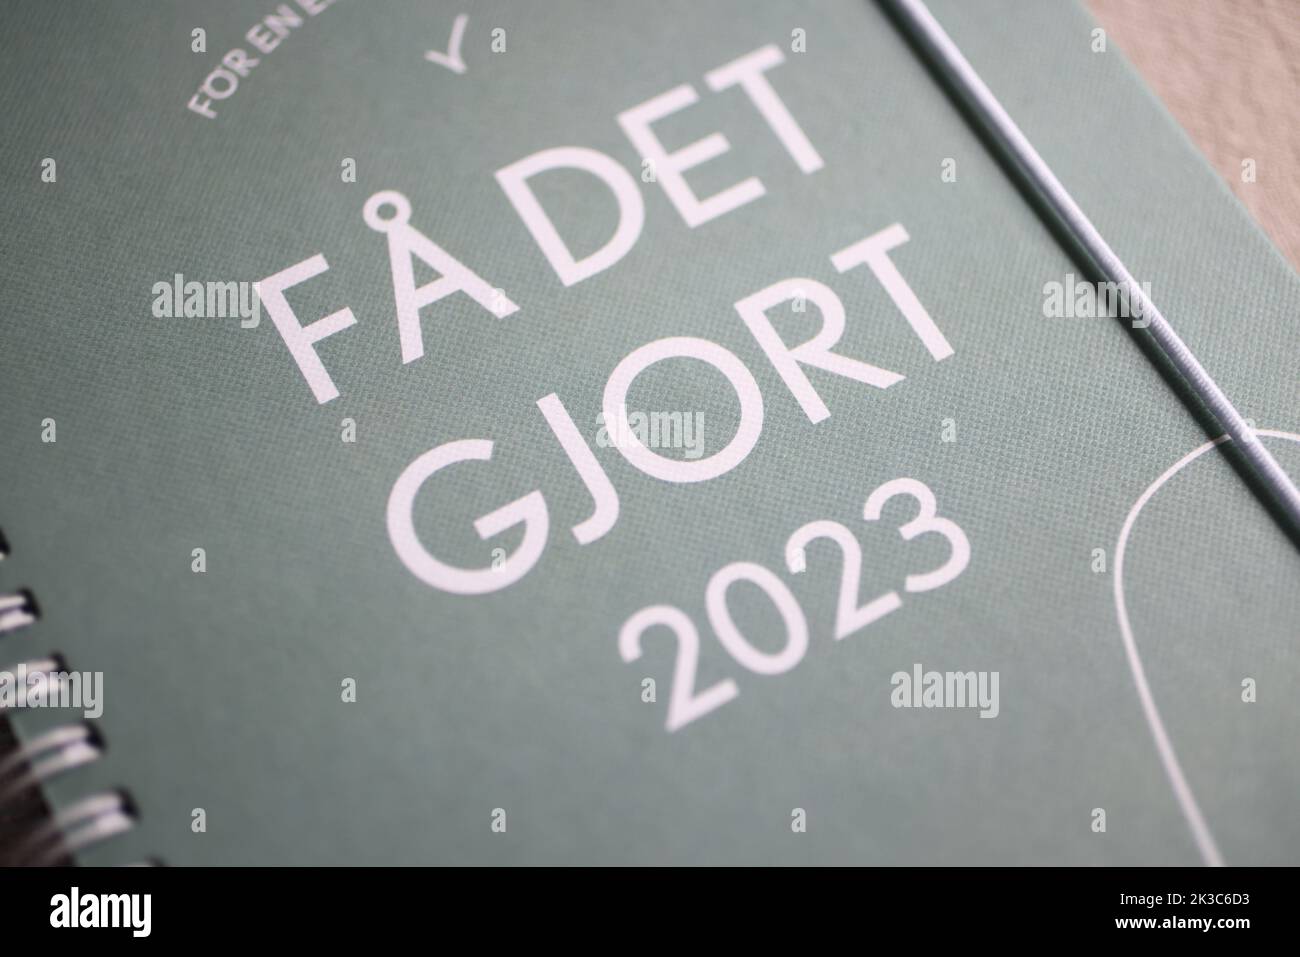 A 2023 calendar. Here with the text 'get it done' (In swedish: få det gjort). Stock Photo